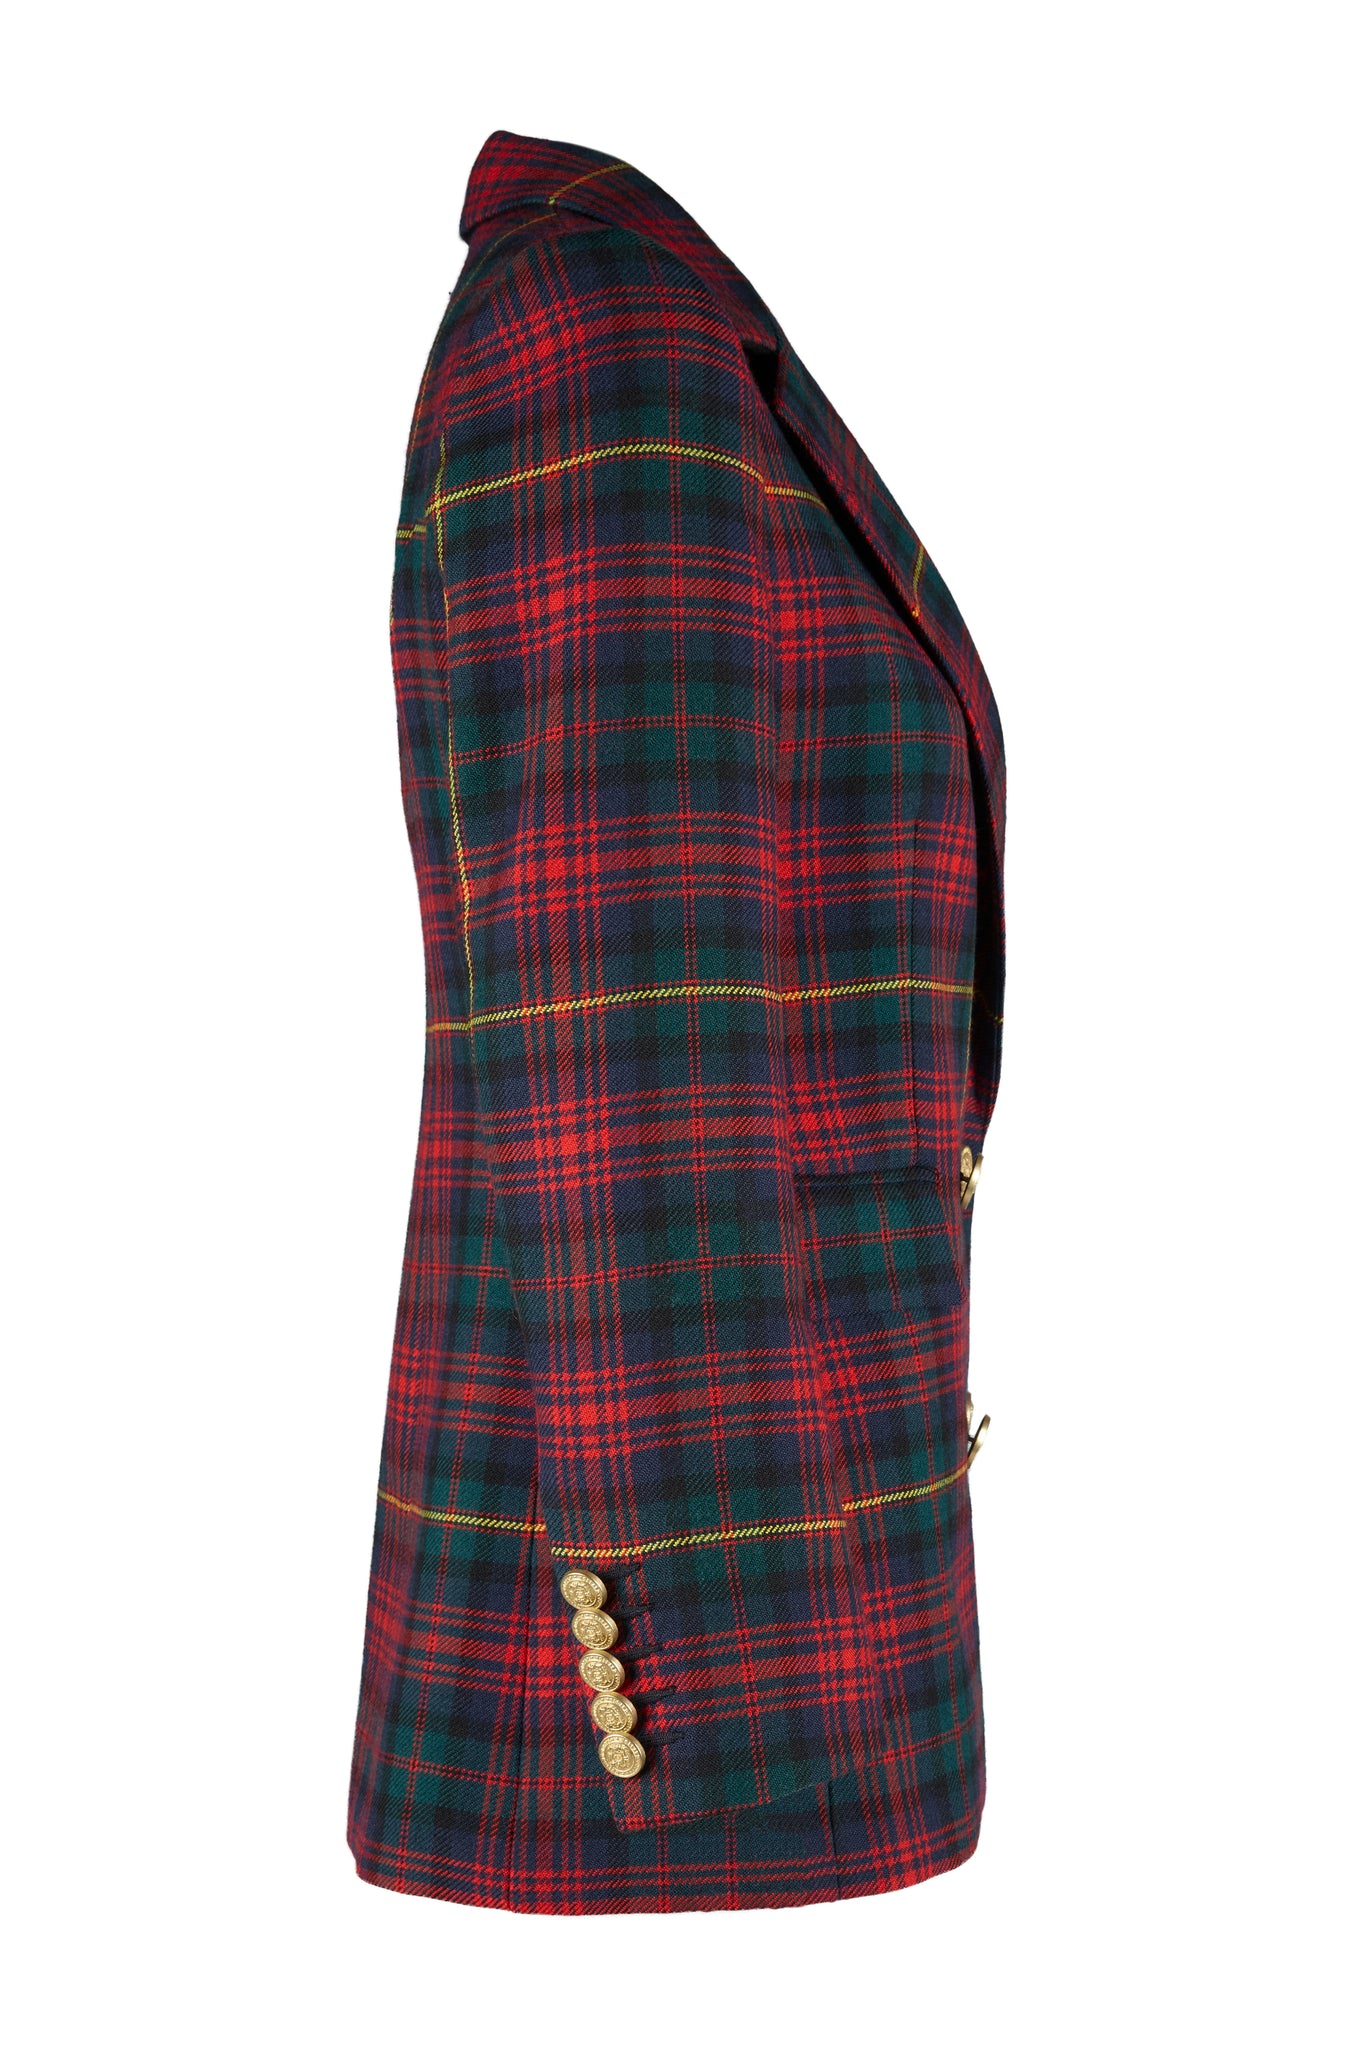 side of double breasted wool blazer in dark red navy green and yellow logan tartan with two hip pockets and gold button details down front and on cuffs and handmade in the uk